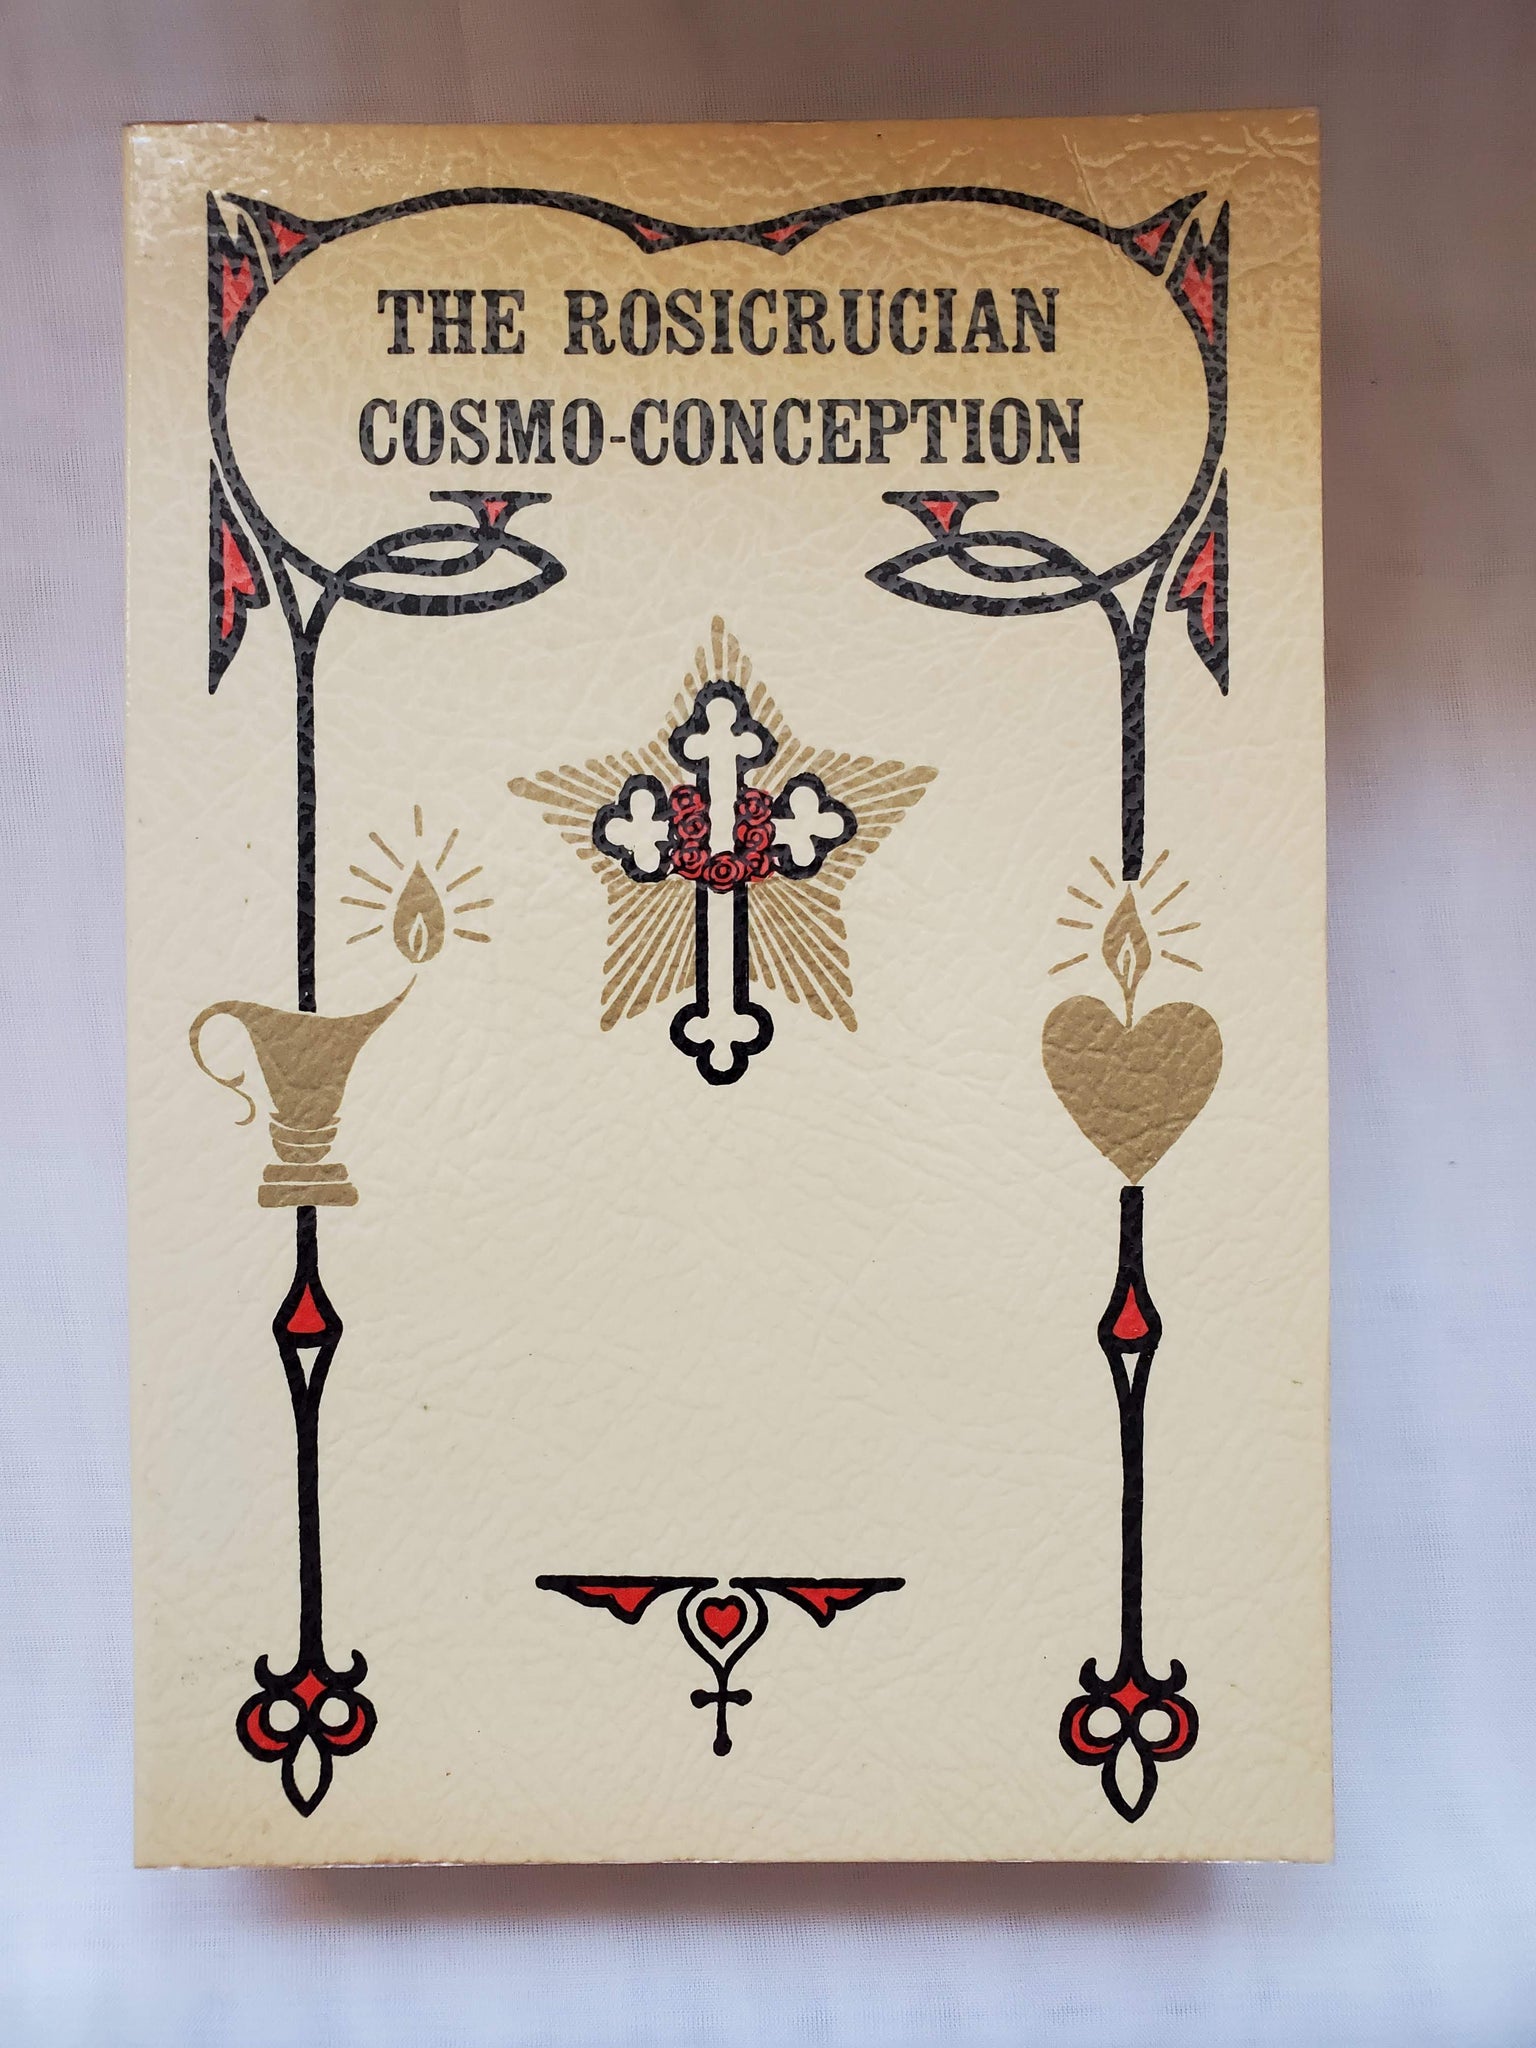 The Rosicrucian Cosmo-Conception 1977 Edition - by Max Heindel